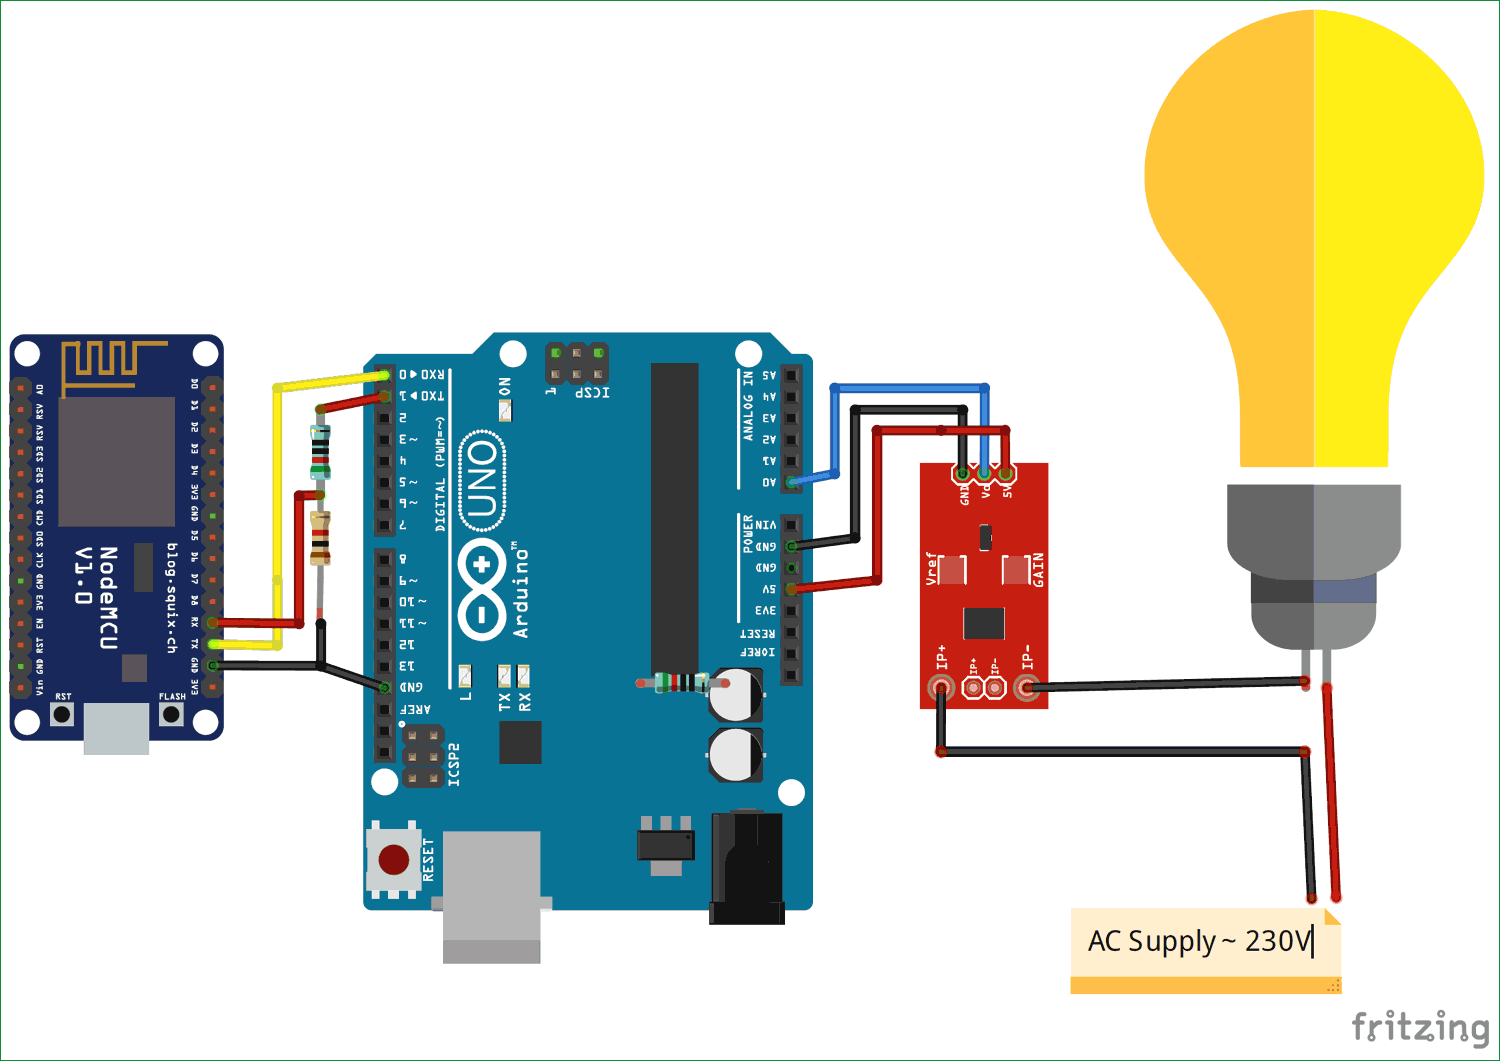 Circuit Diagram for IoT based Electricity Energy Meter using ESP12 and Arduino